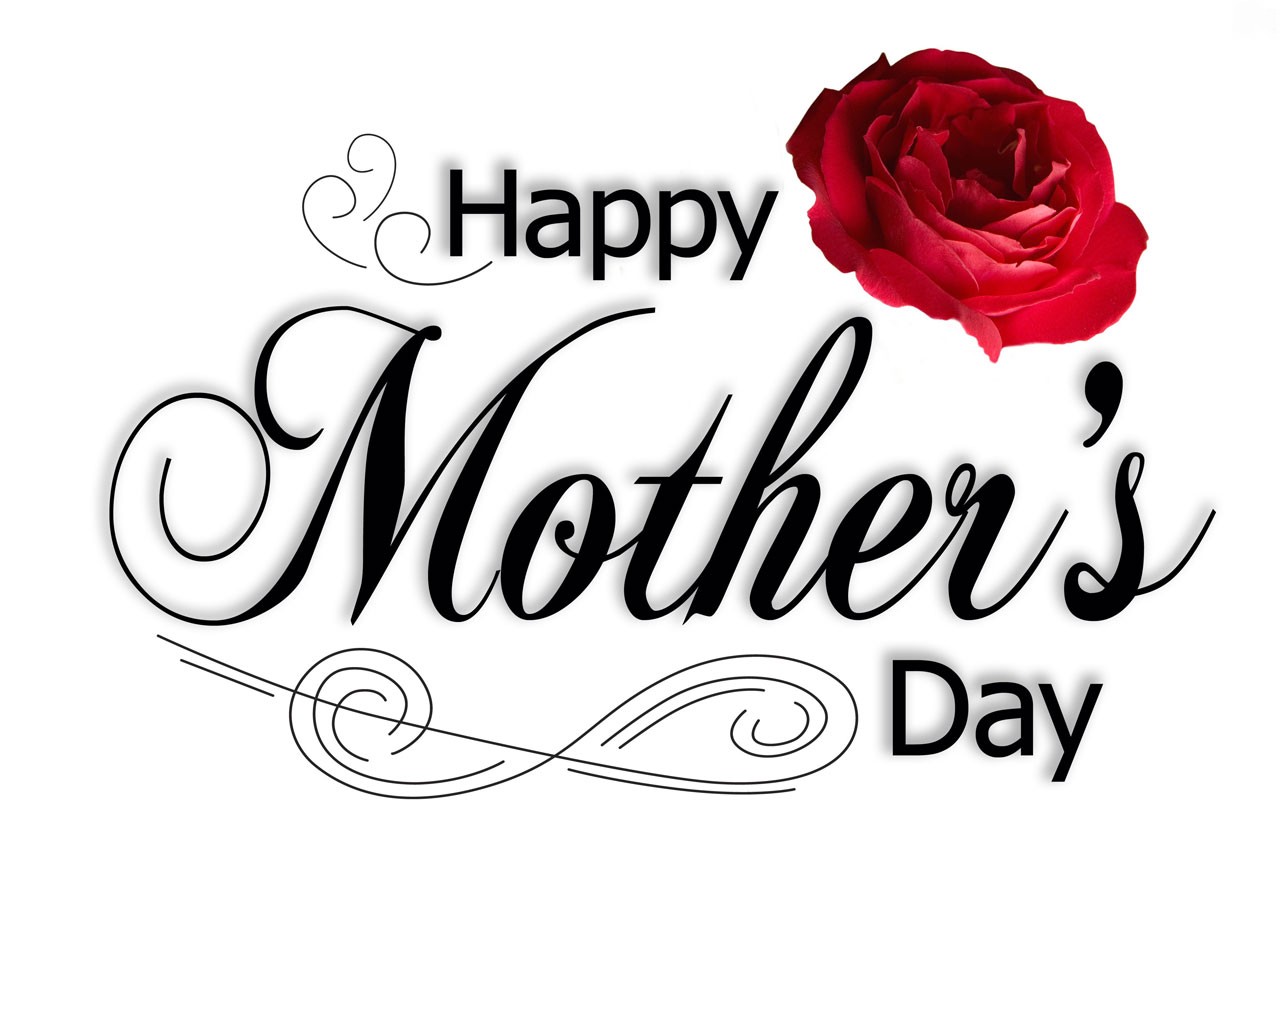 Happy mother wallpaper mothers quotes messages green status wishes flowers flower background whatsapp wallpapers fanpop plant mobile who